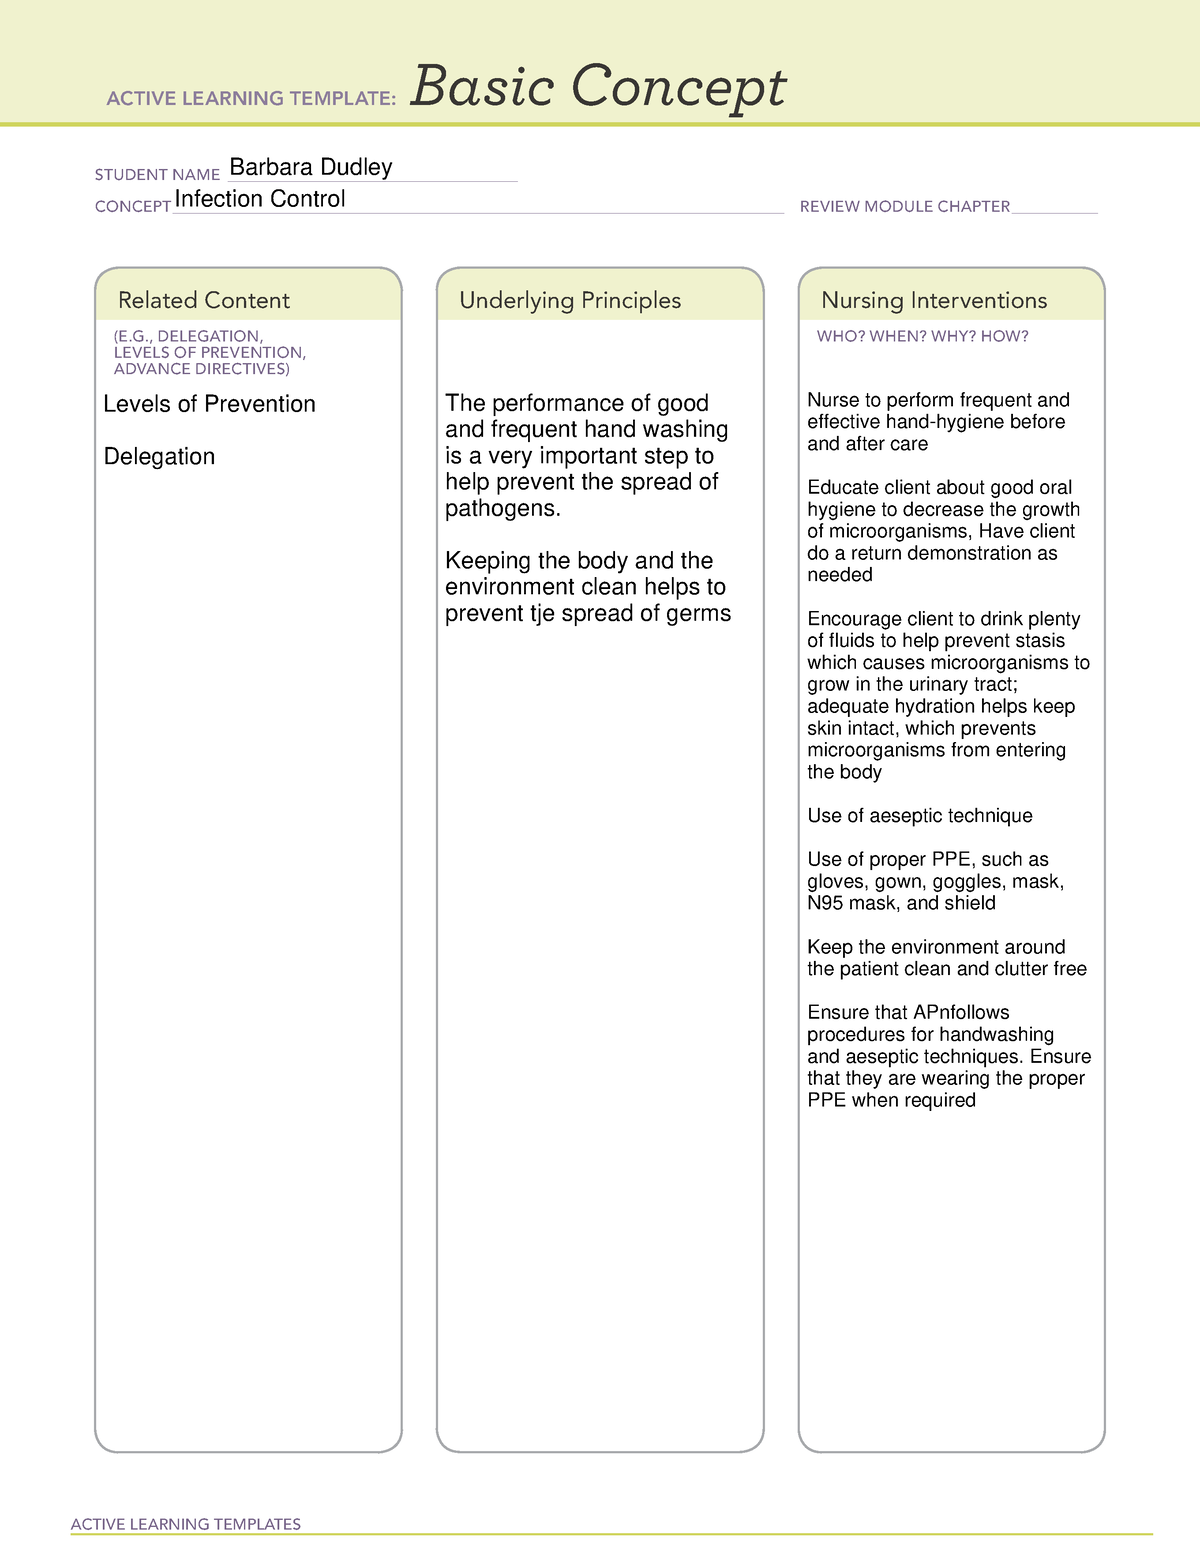 Basic Concept Infection Control Completed ACTIVE LEARNING TEMPLATES